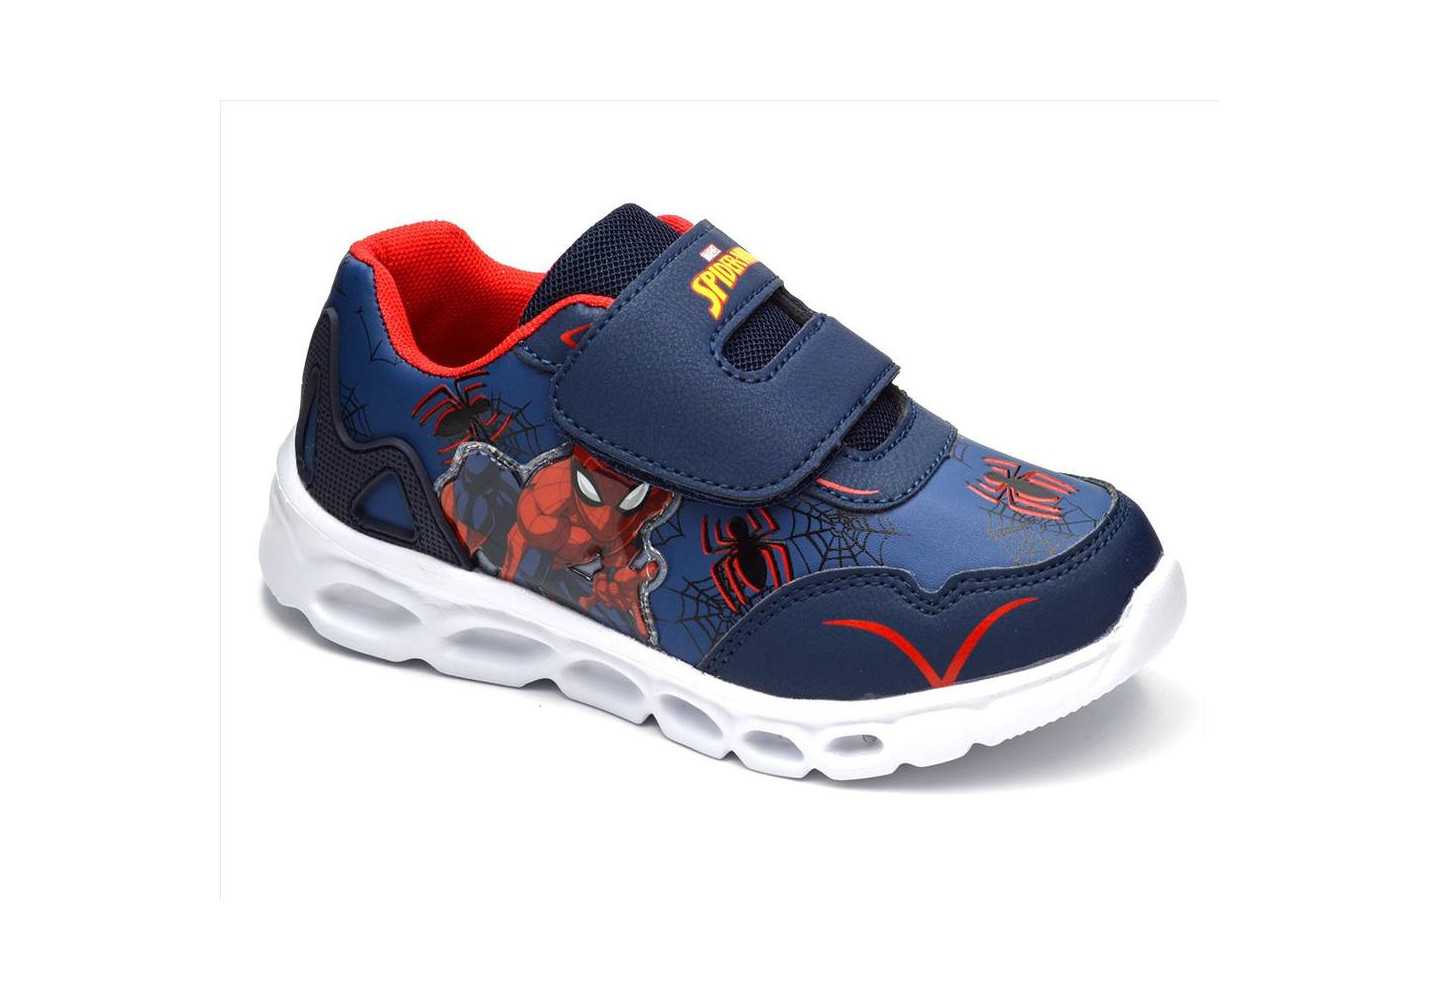 Scarpa sportiva in similpelle con luci Marvel Spiderman R1310211S navy